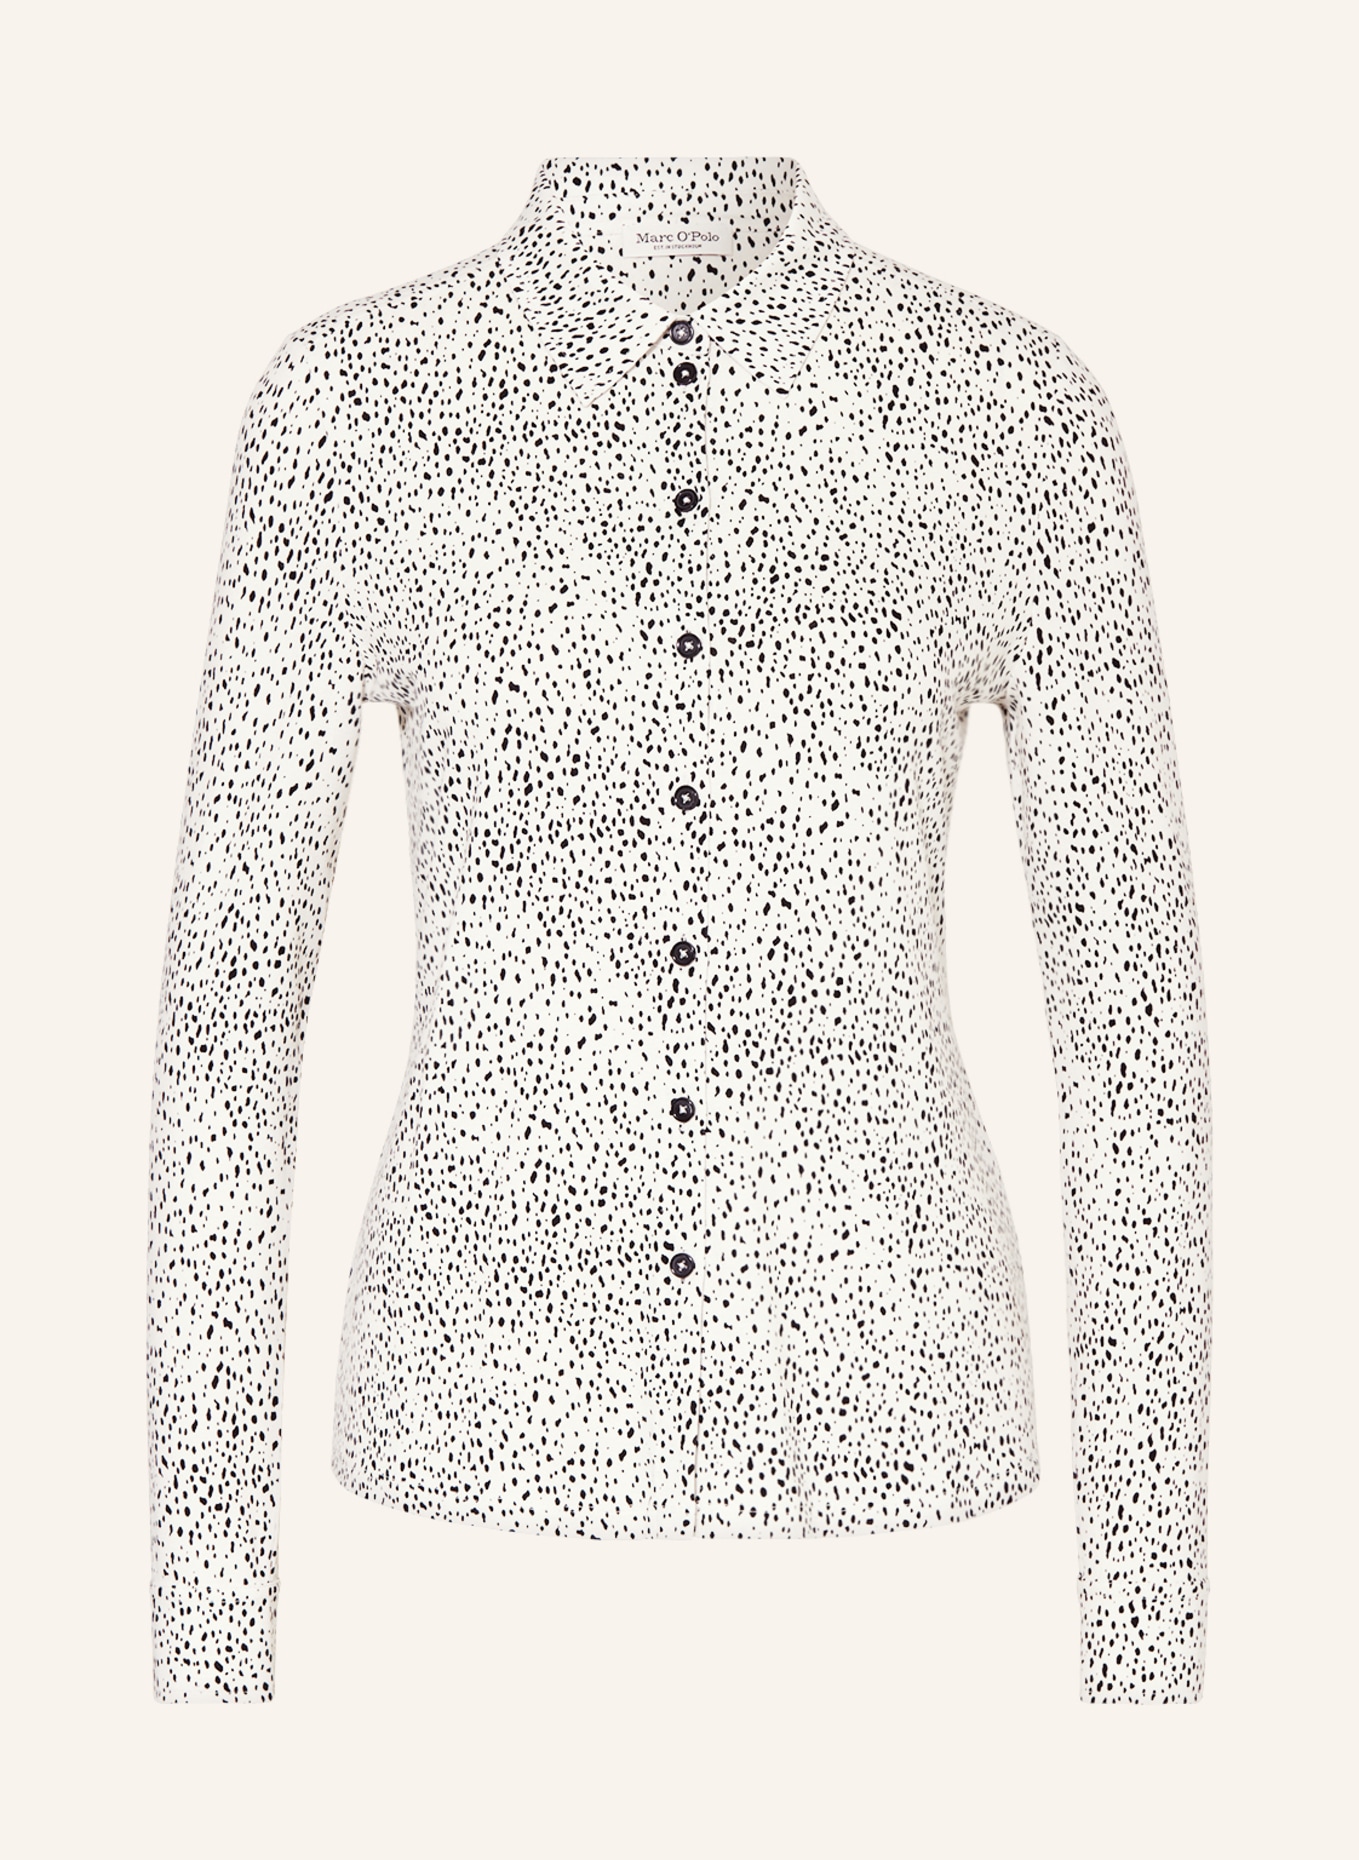 Marc O'Polo Shirt blouse made of jersey, Color: CREAM/ BLACK (Image 1)